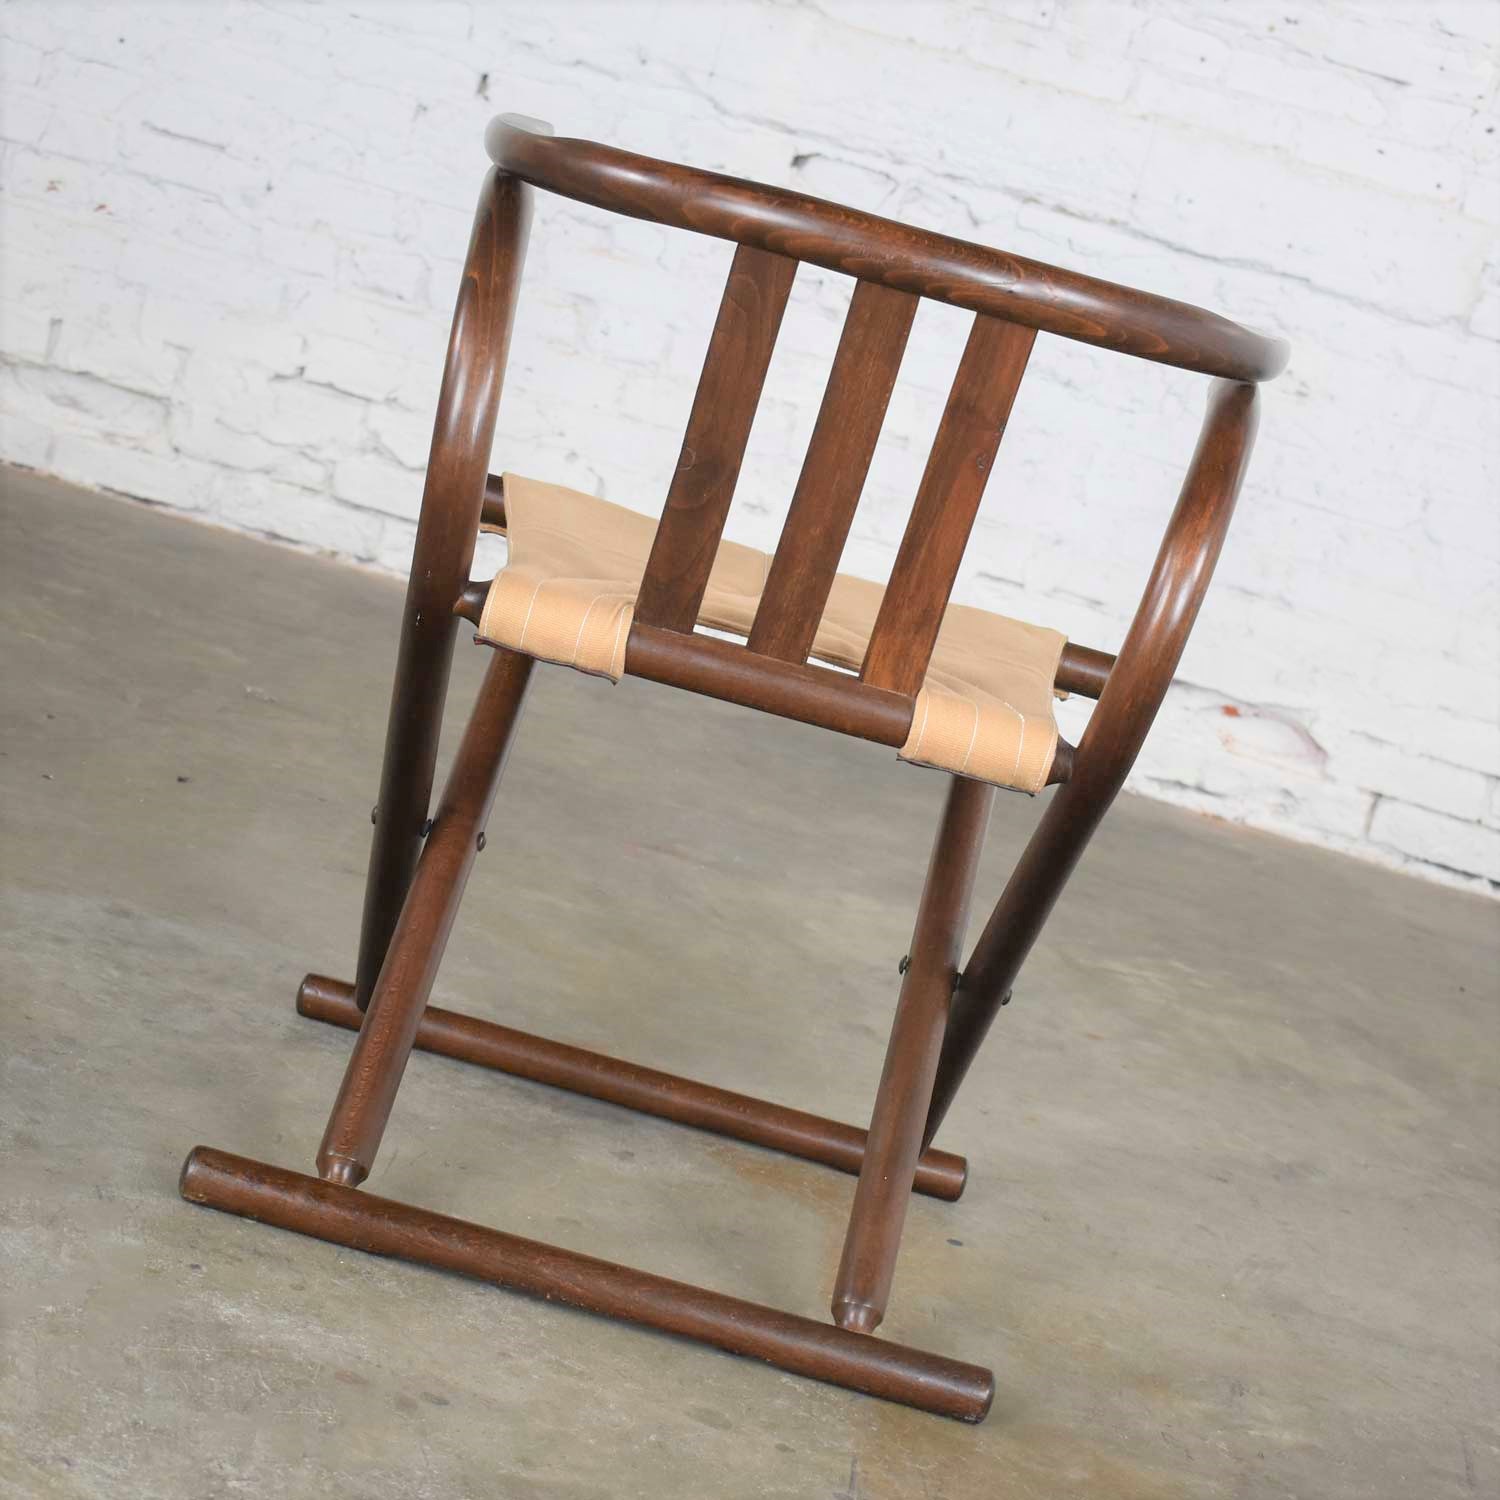 Thonet Style Bentwood Walnut Tone Folding Chair w/ Canvas Sling Seat Made in Romania